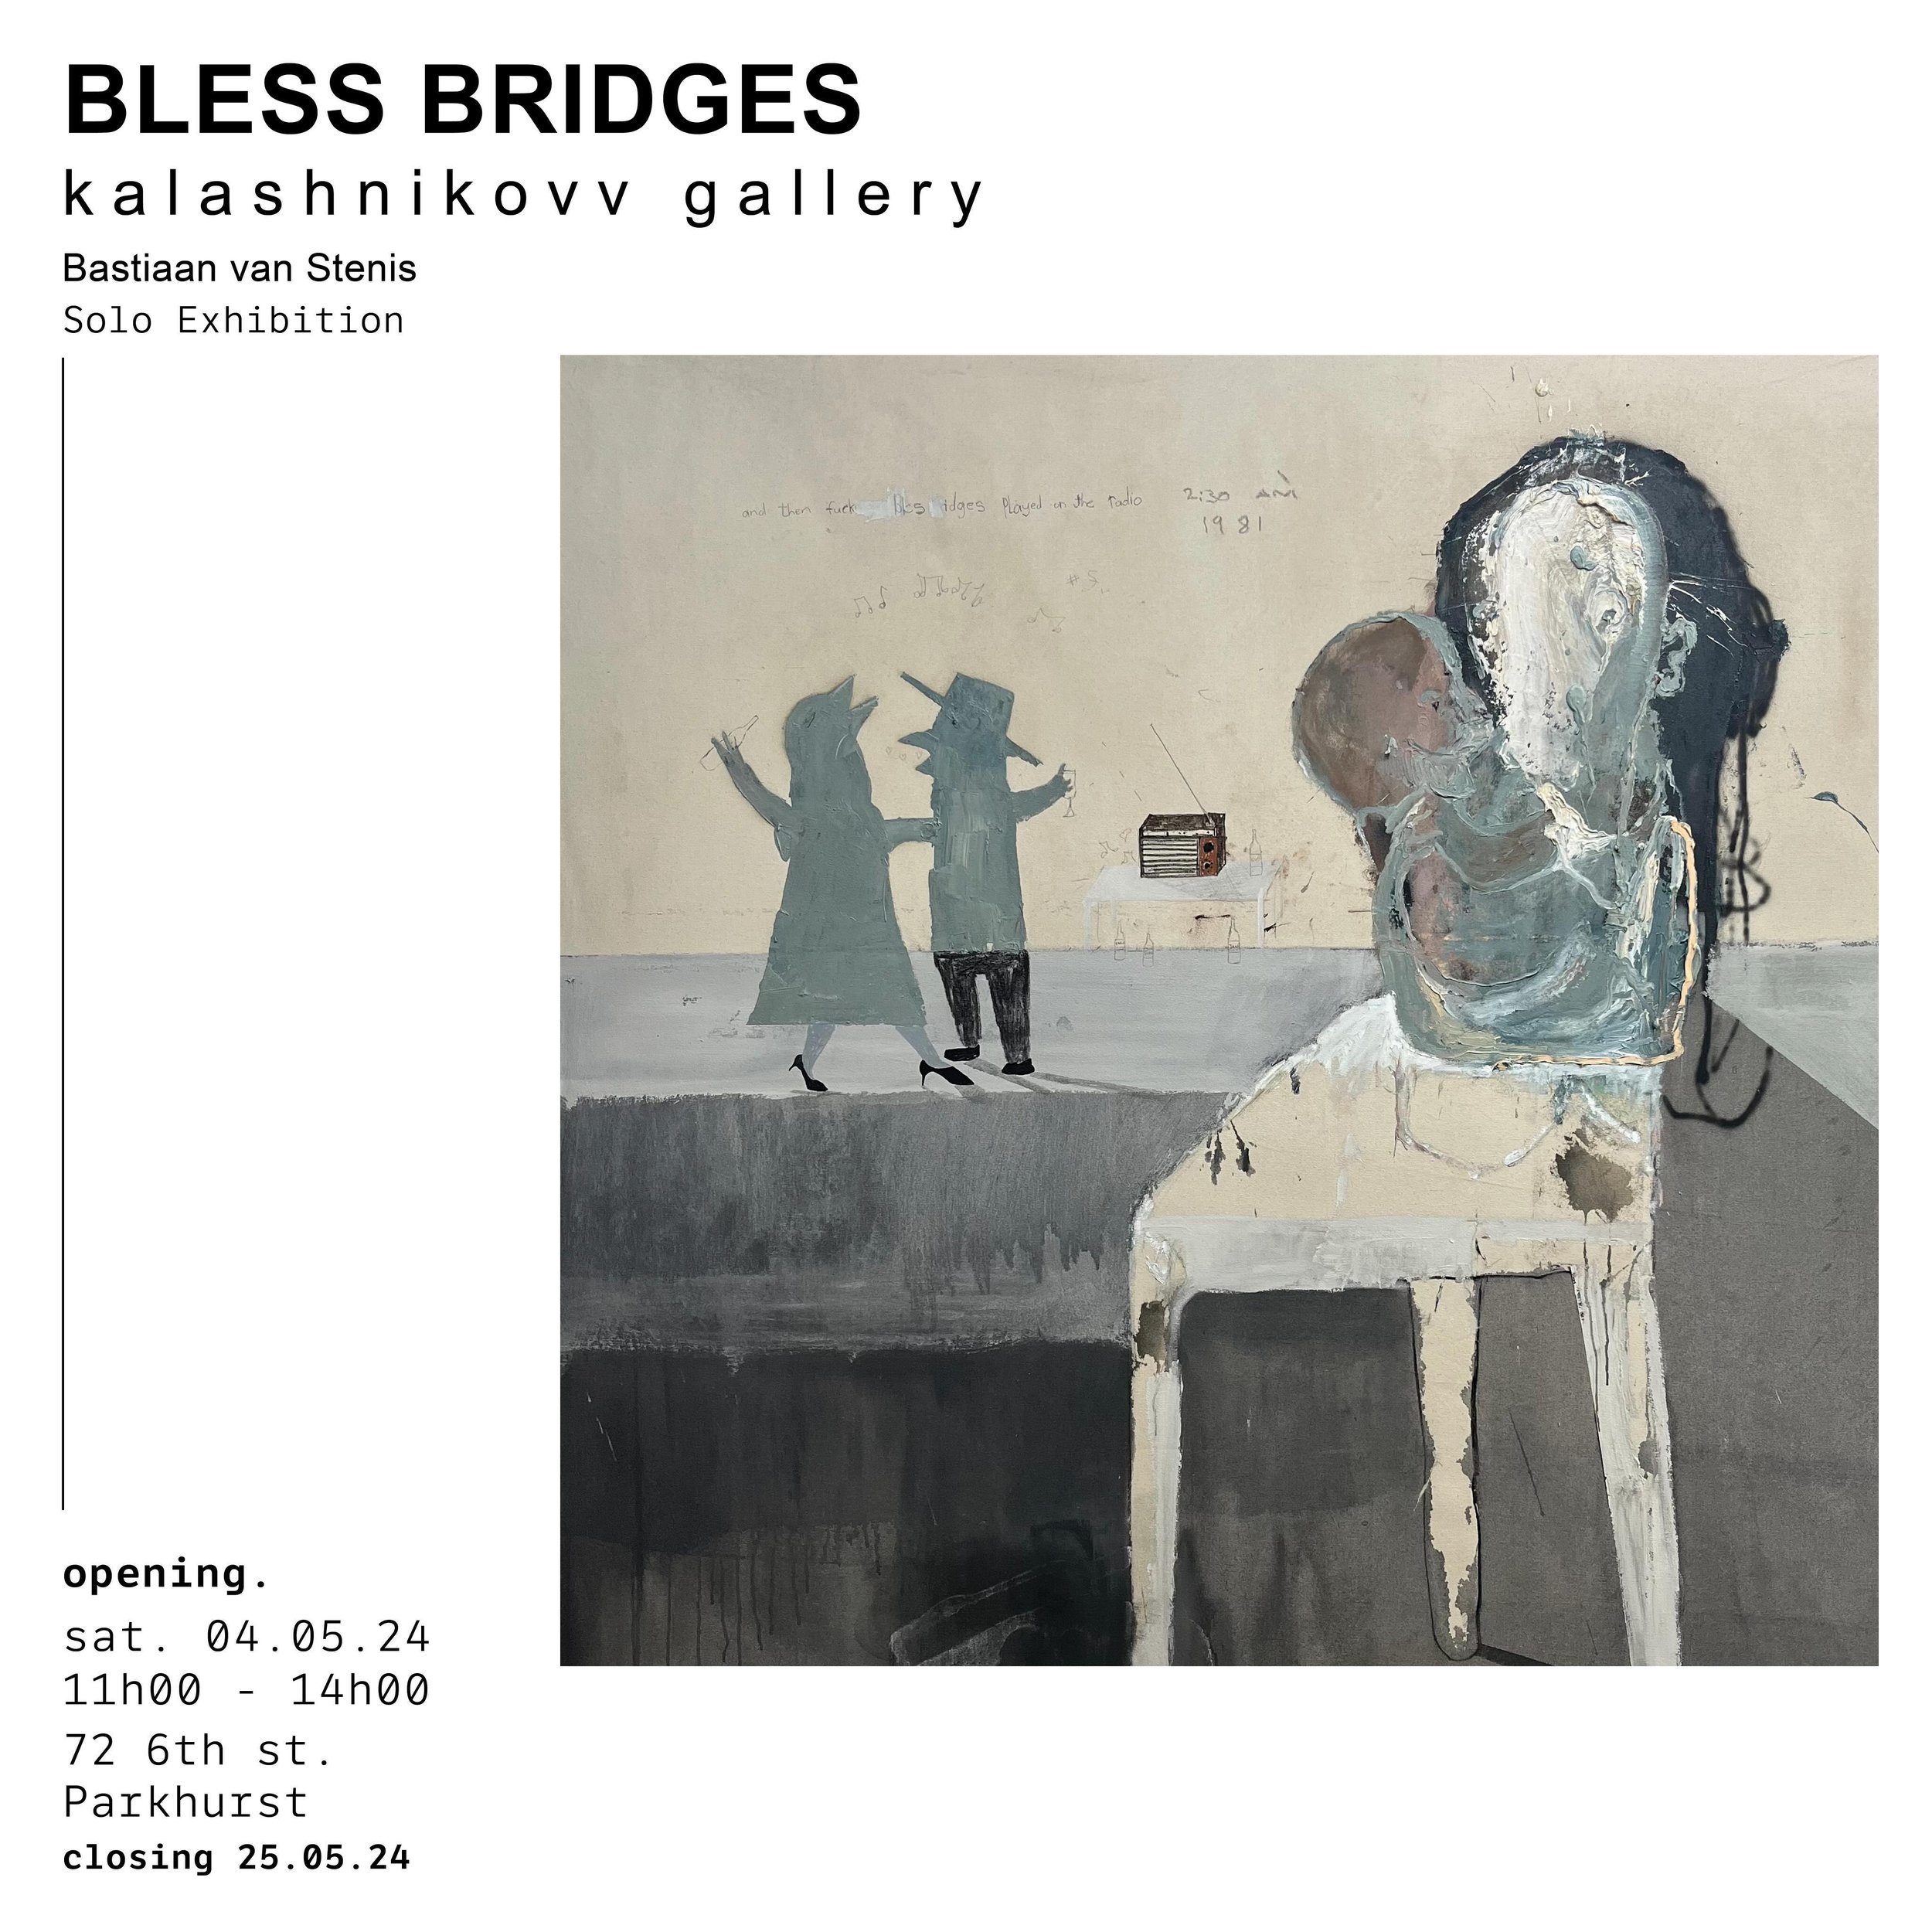 Opening this Saturday is Bastiaan van Stenis&lsquo; debut showing with Kalashnikovv, &lsquo;Bless Bridges&rsquo;. 

Visit us this Saturday, from 11:00 to 14:00, to view an array of painted works from @bastiaanvanstenisart, with a curated dj selection